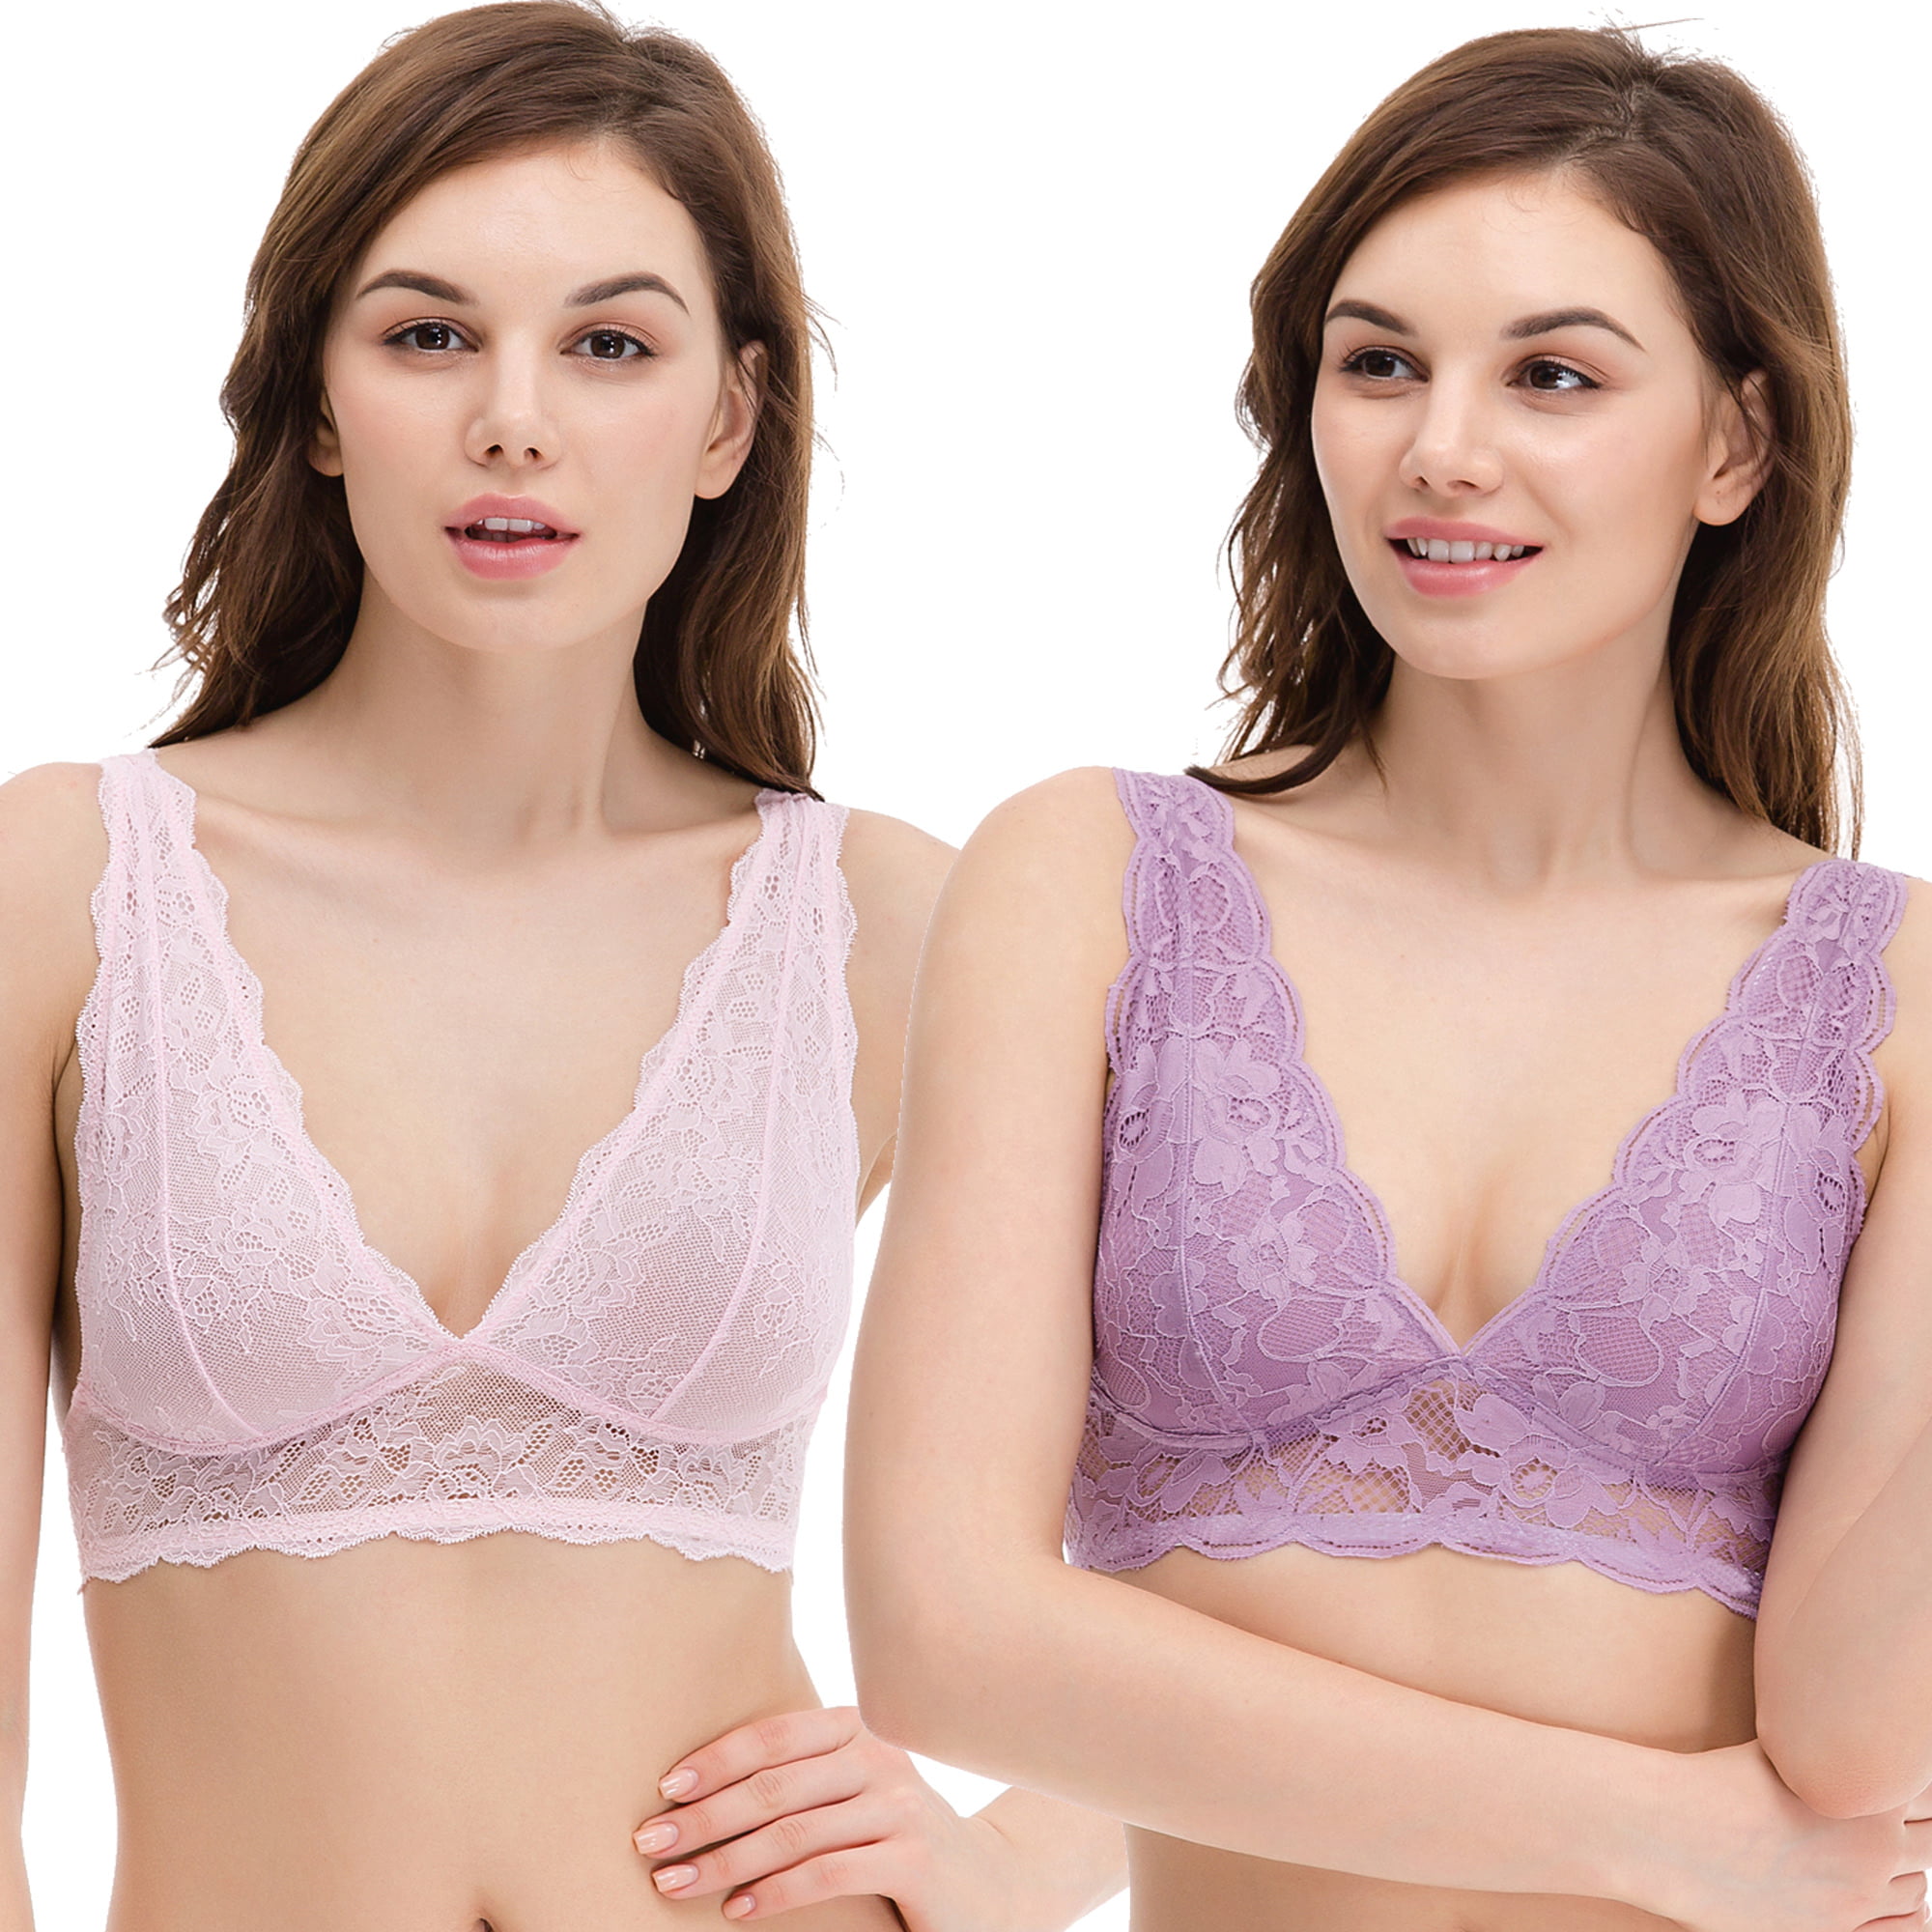 Curve Muse Plus Size Unlined Underwire Lace Bra with Padded Shoulder  Straps-2PK-Pink Print,Nude-40B/90B price in UAE,  UAE